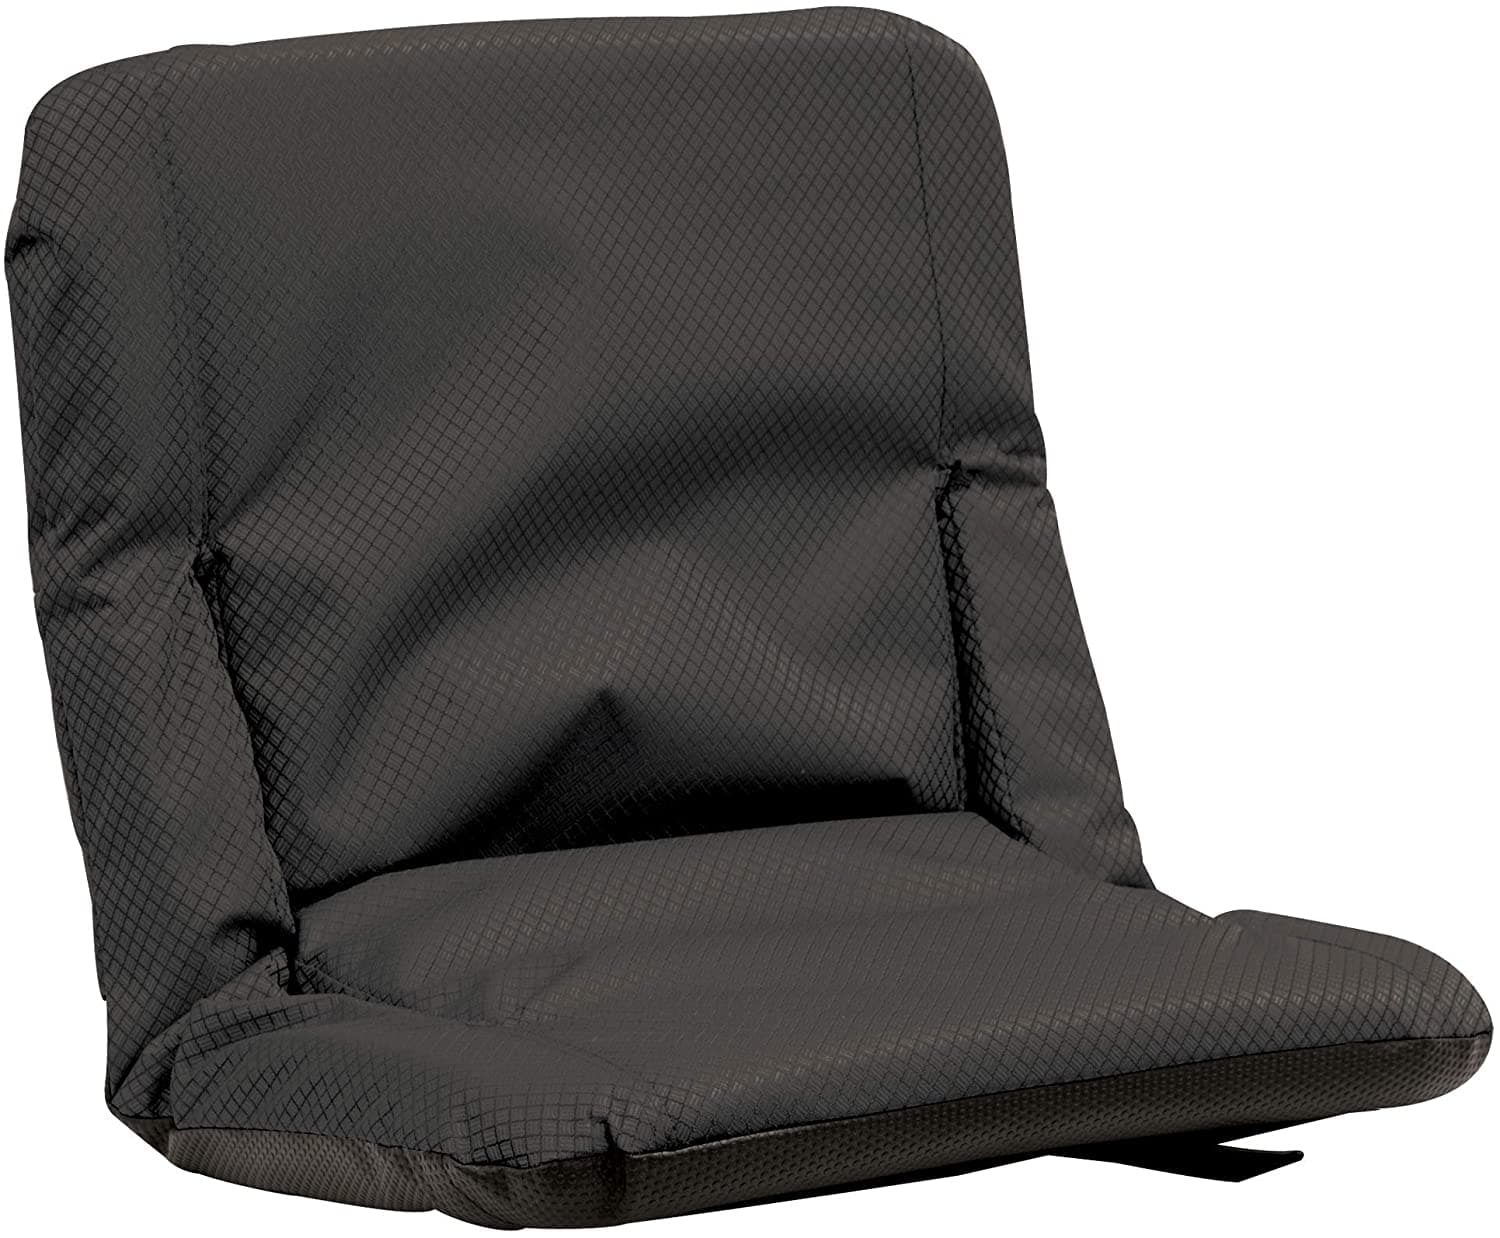 Rio Adventure Go Anywhere Folding Chair -Arms, Padded with Backpack Straps - Senior.com Stadium Chairs